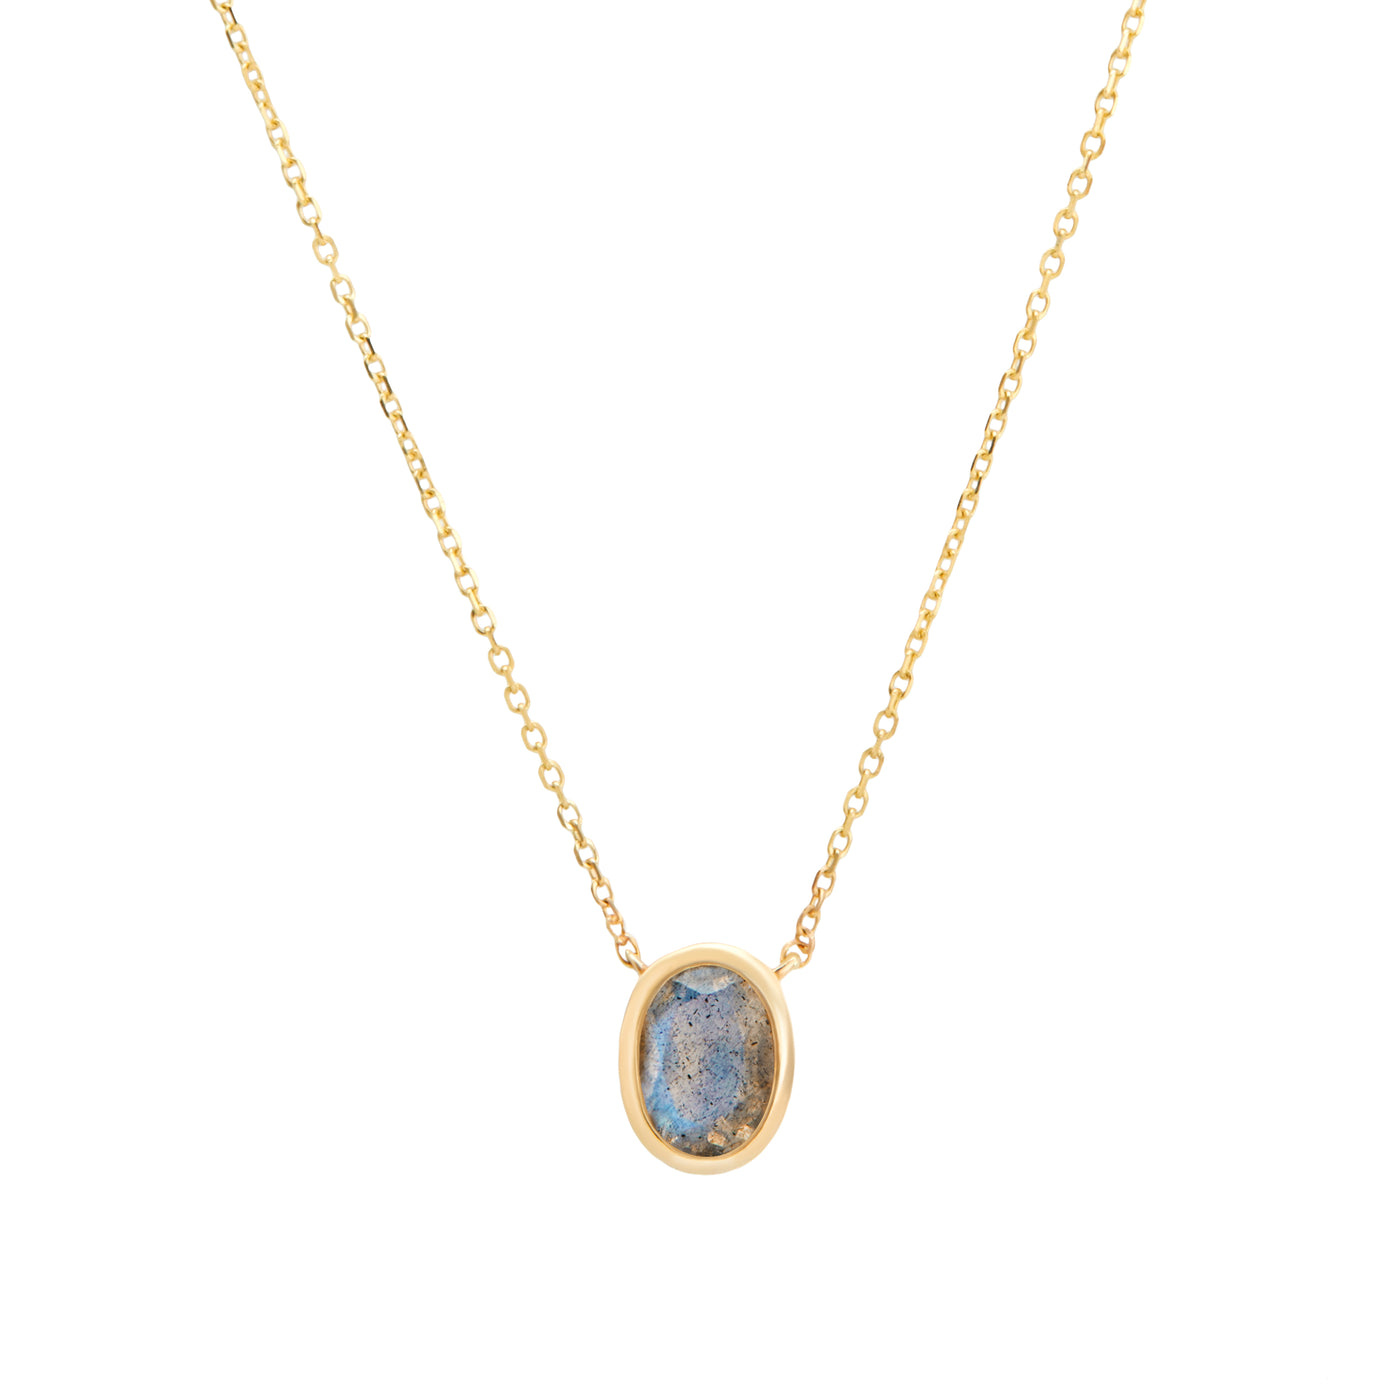  14 Karat Yellow Gold Necklace with Oval Shaped Labradorite Stone Against White Background